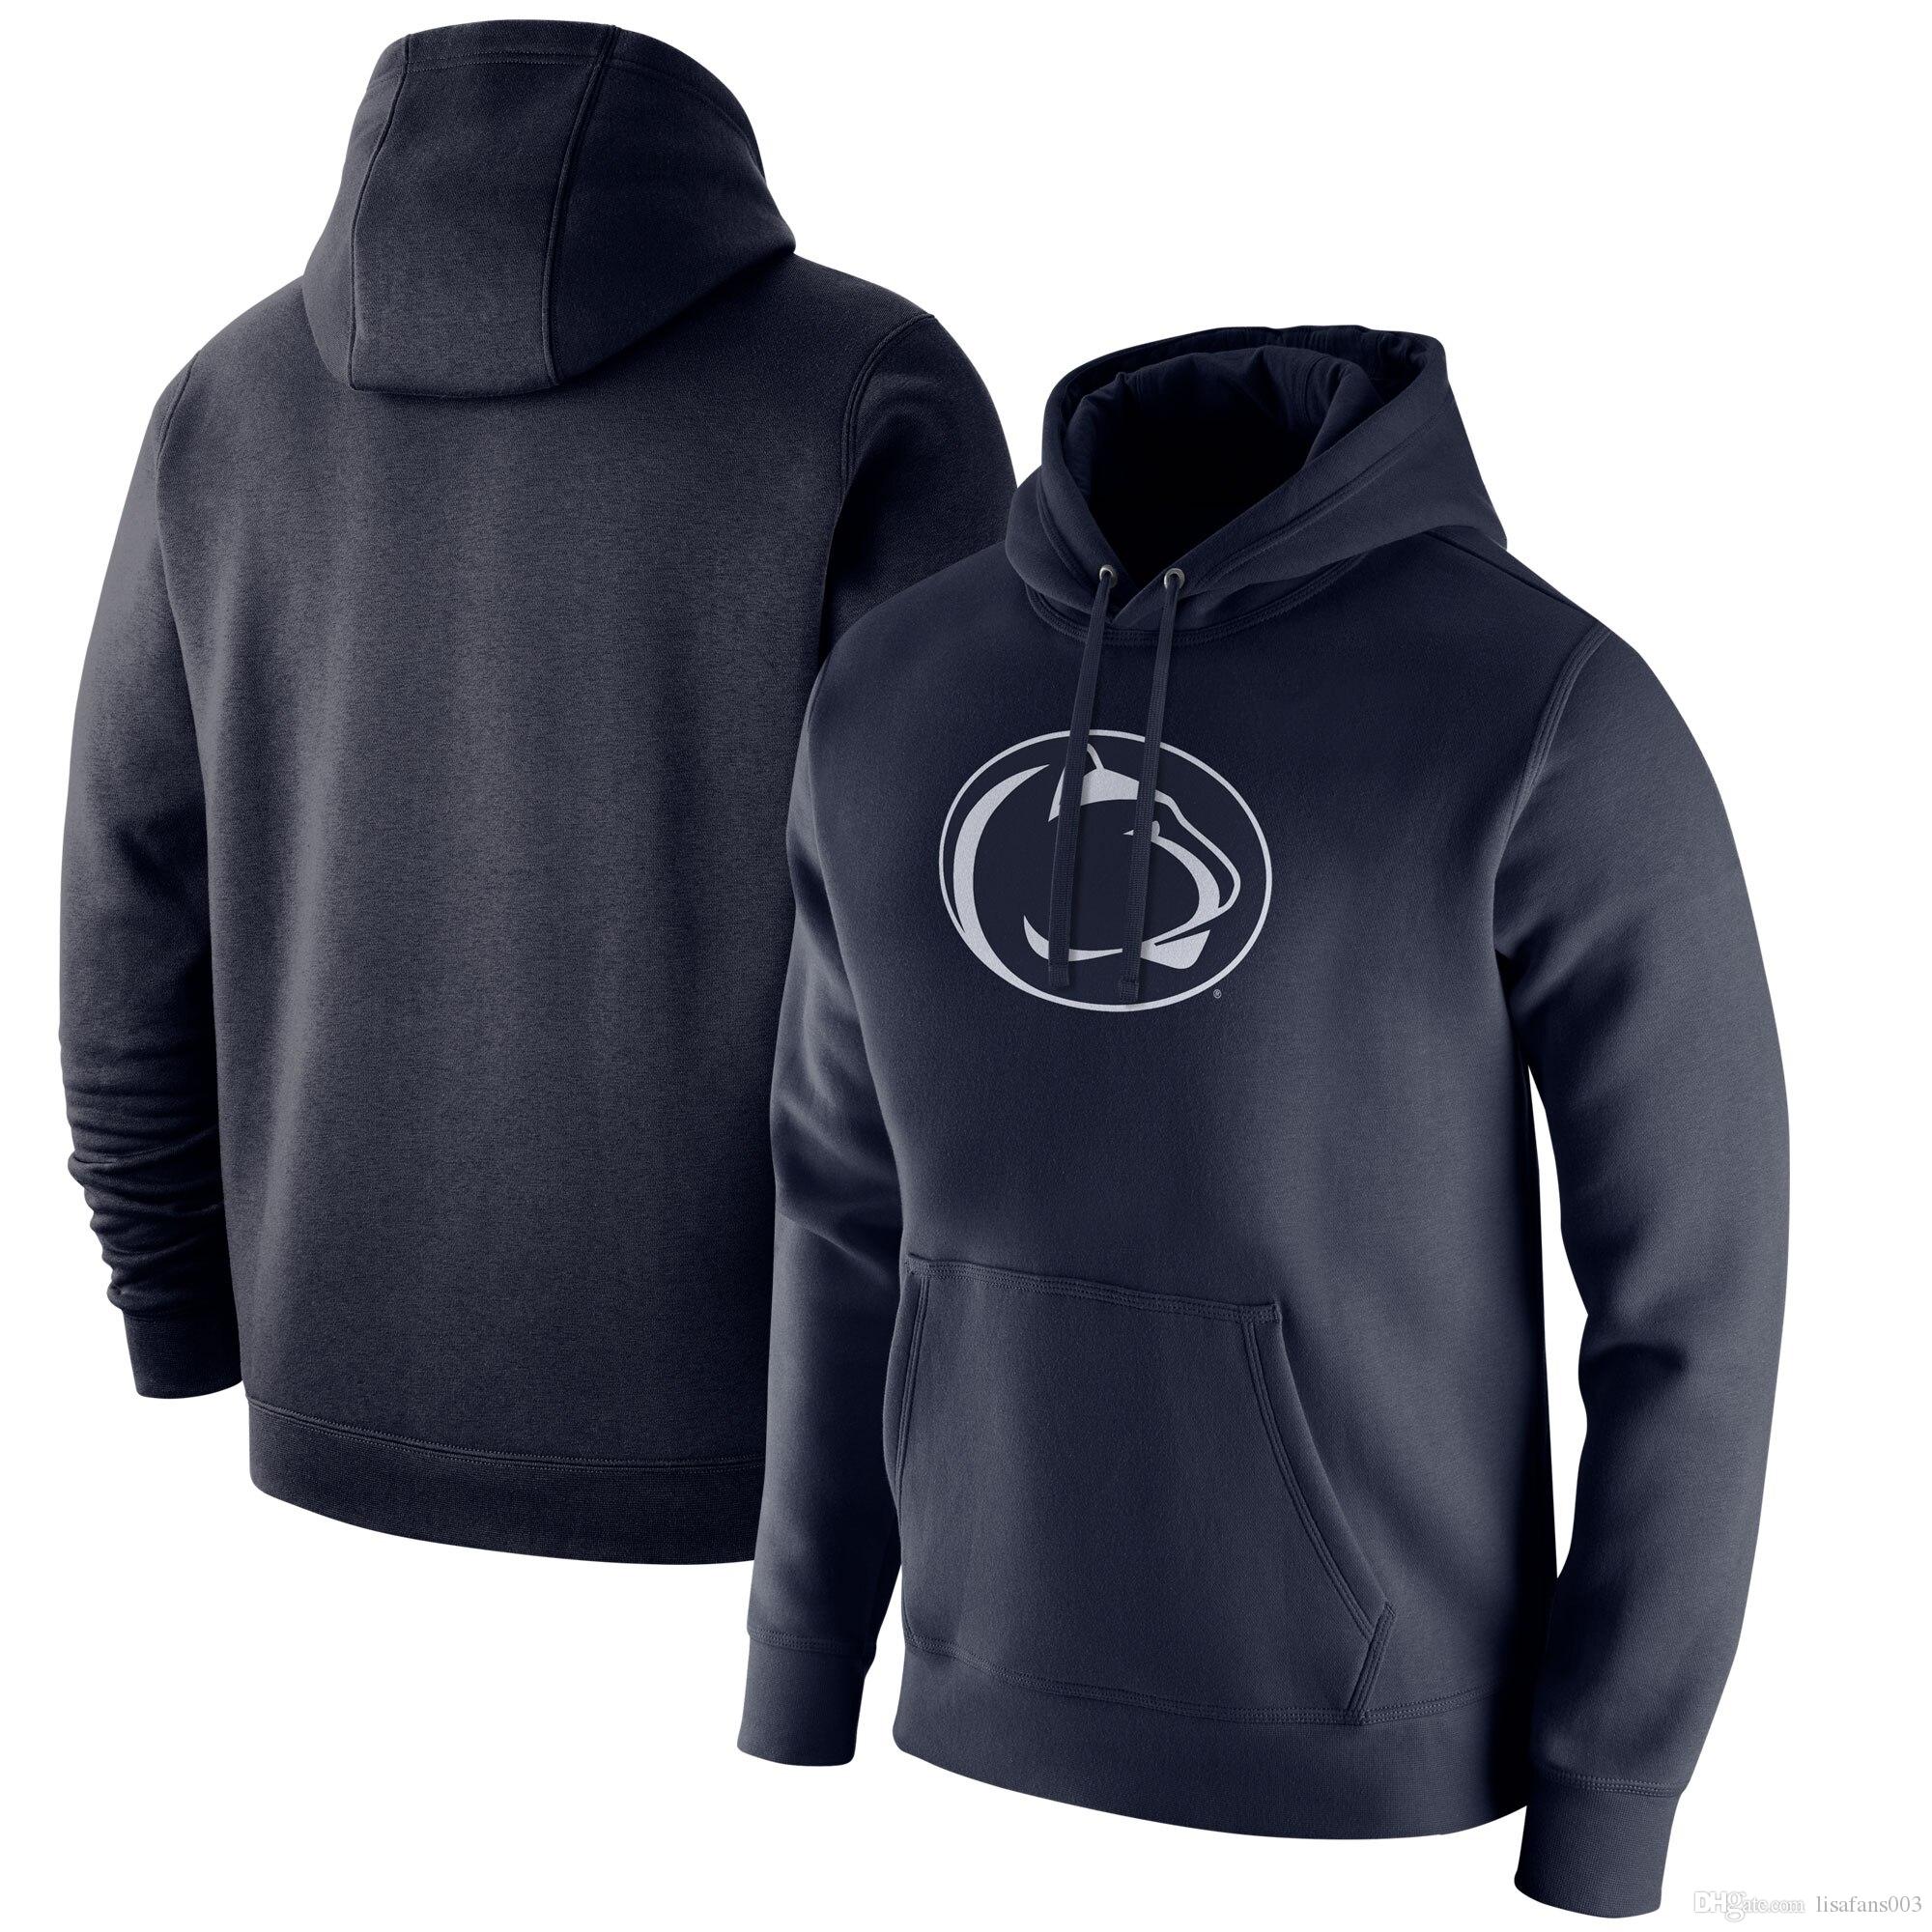 Penn State Nittany Lions Navy Wake Forest Demon Deacons Club Fleece Pullover Hoodie Washington State Cougars herrtröja 2021